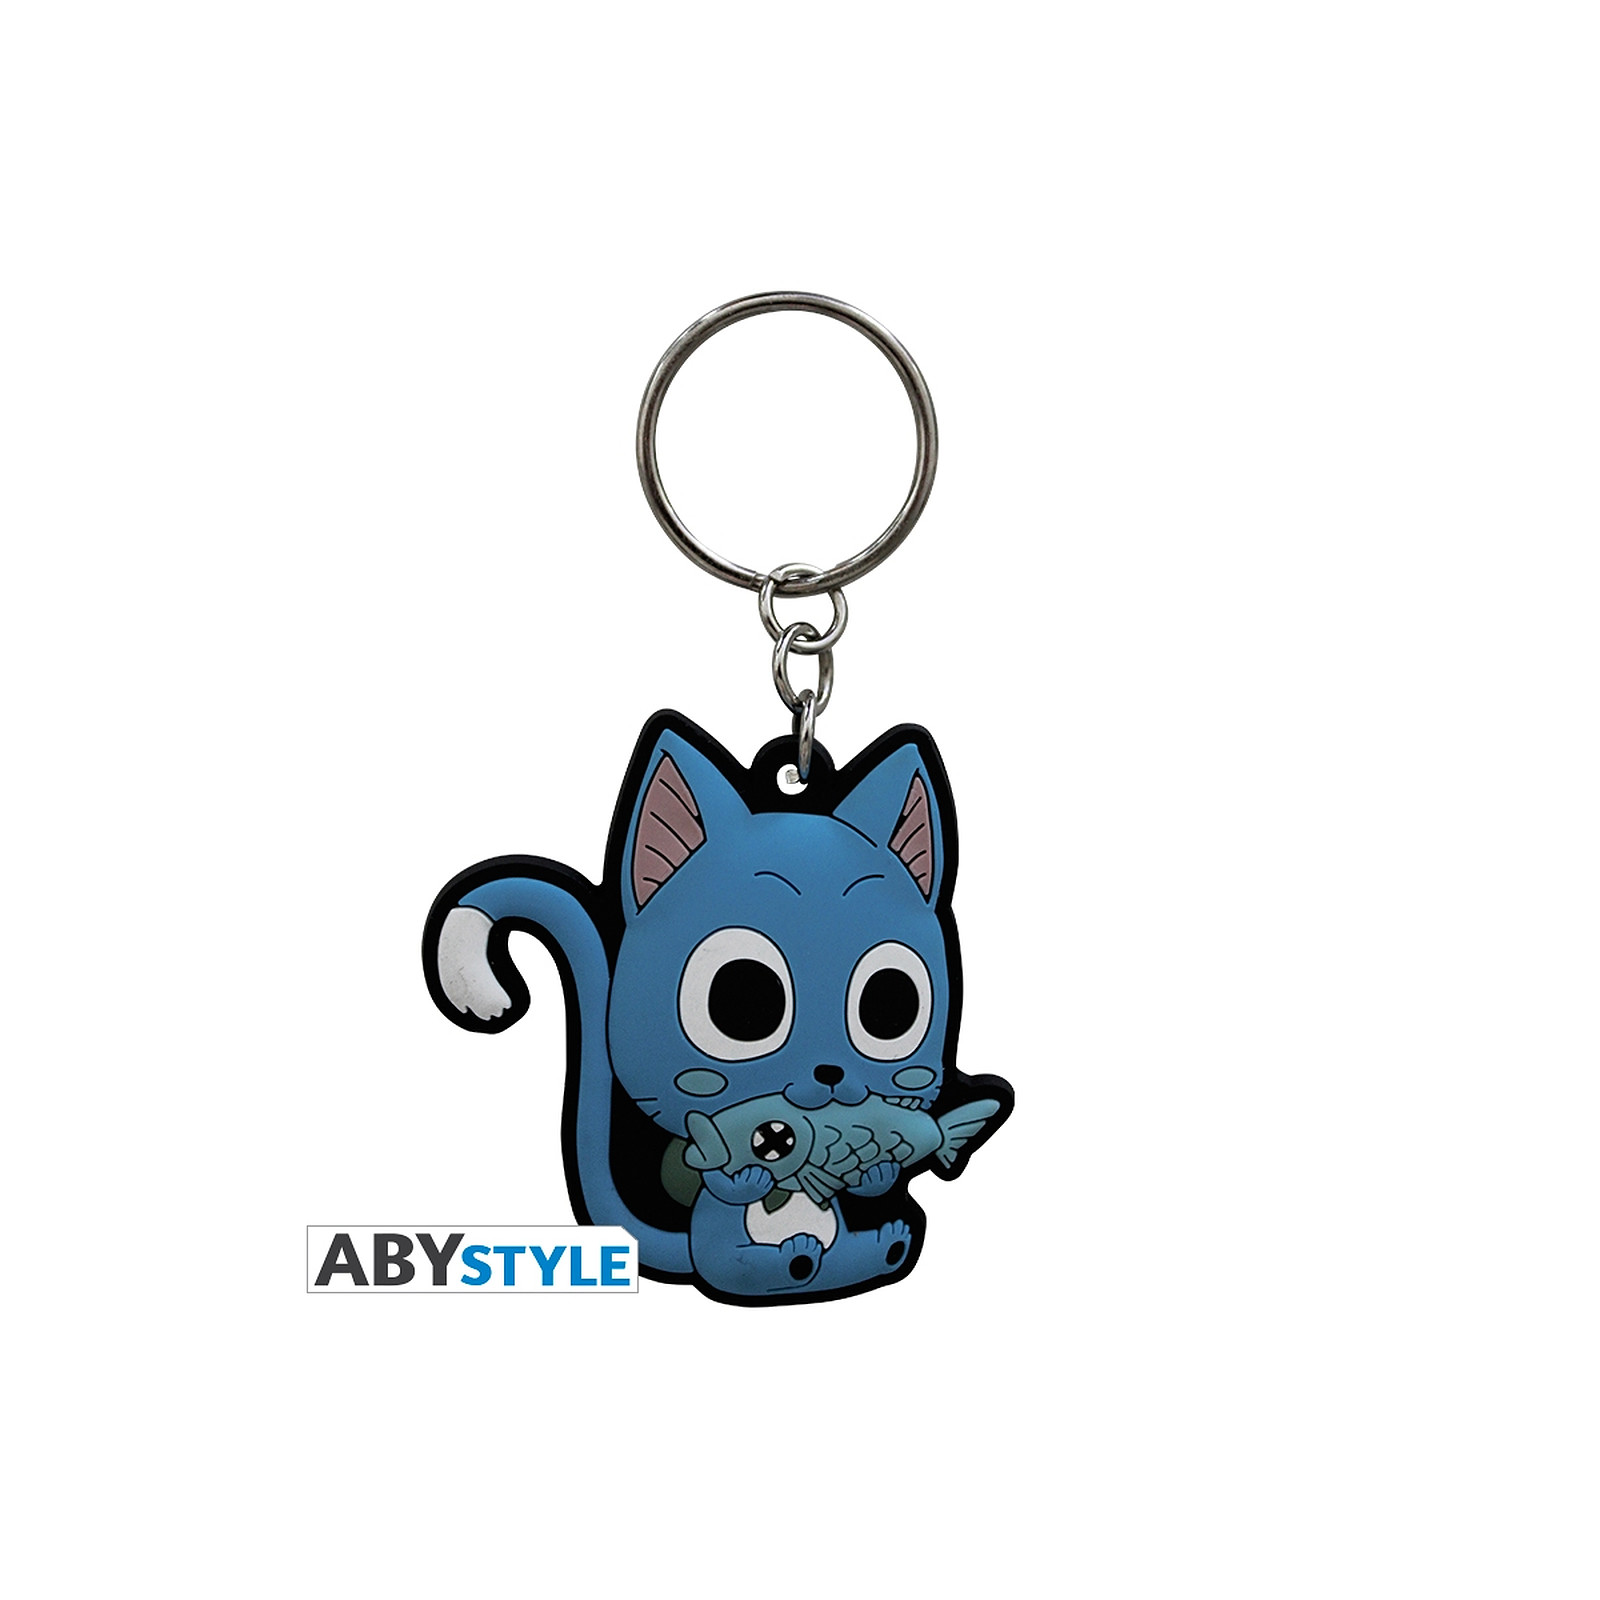 Fairy Tail - Porte-cles Happy - Porte-cles Abystyle